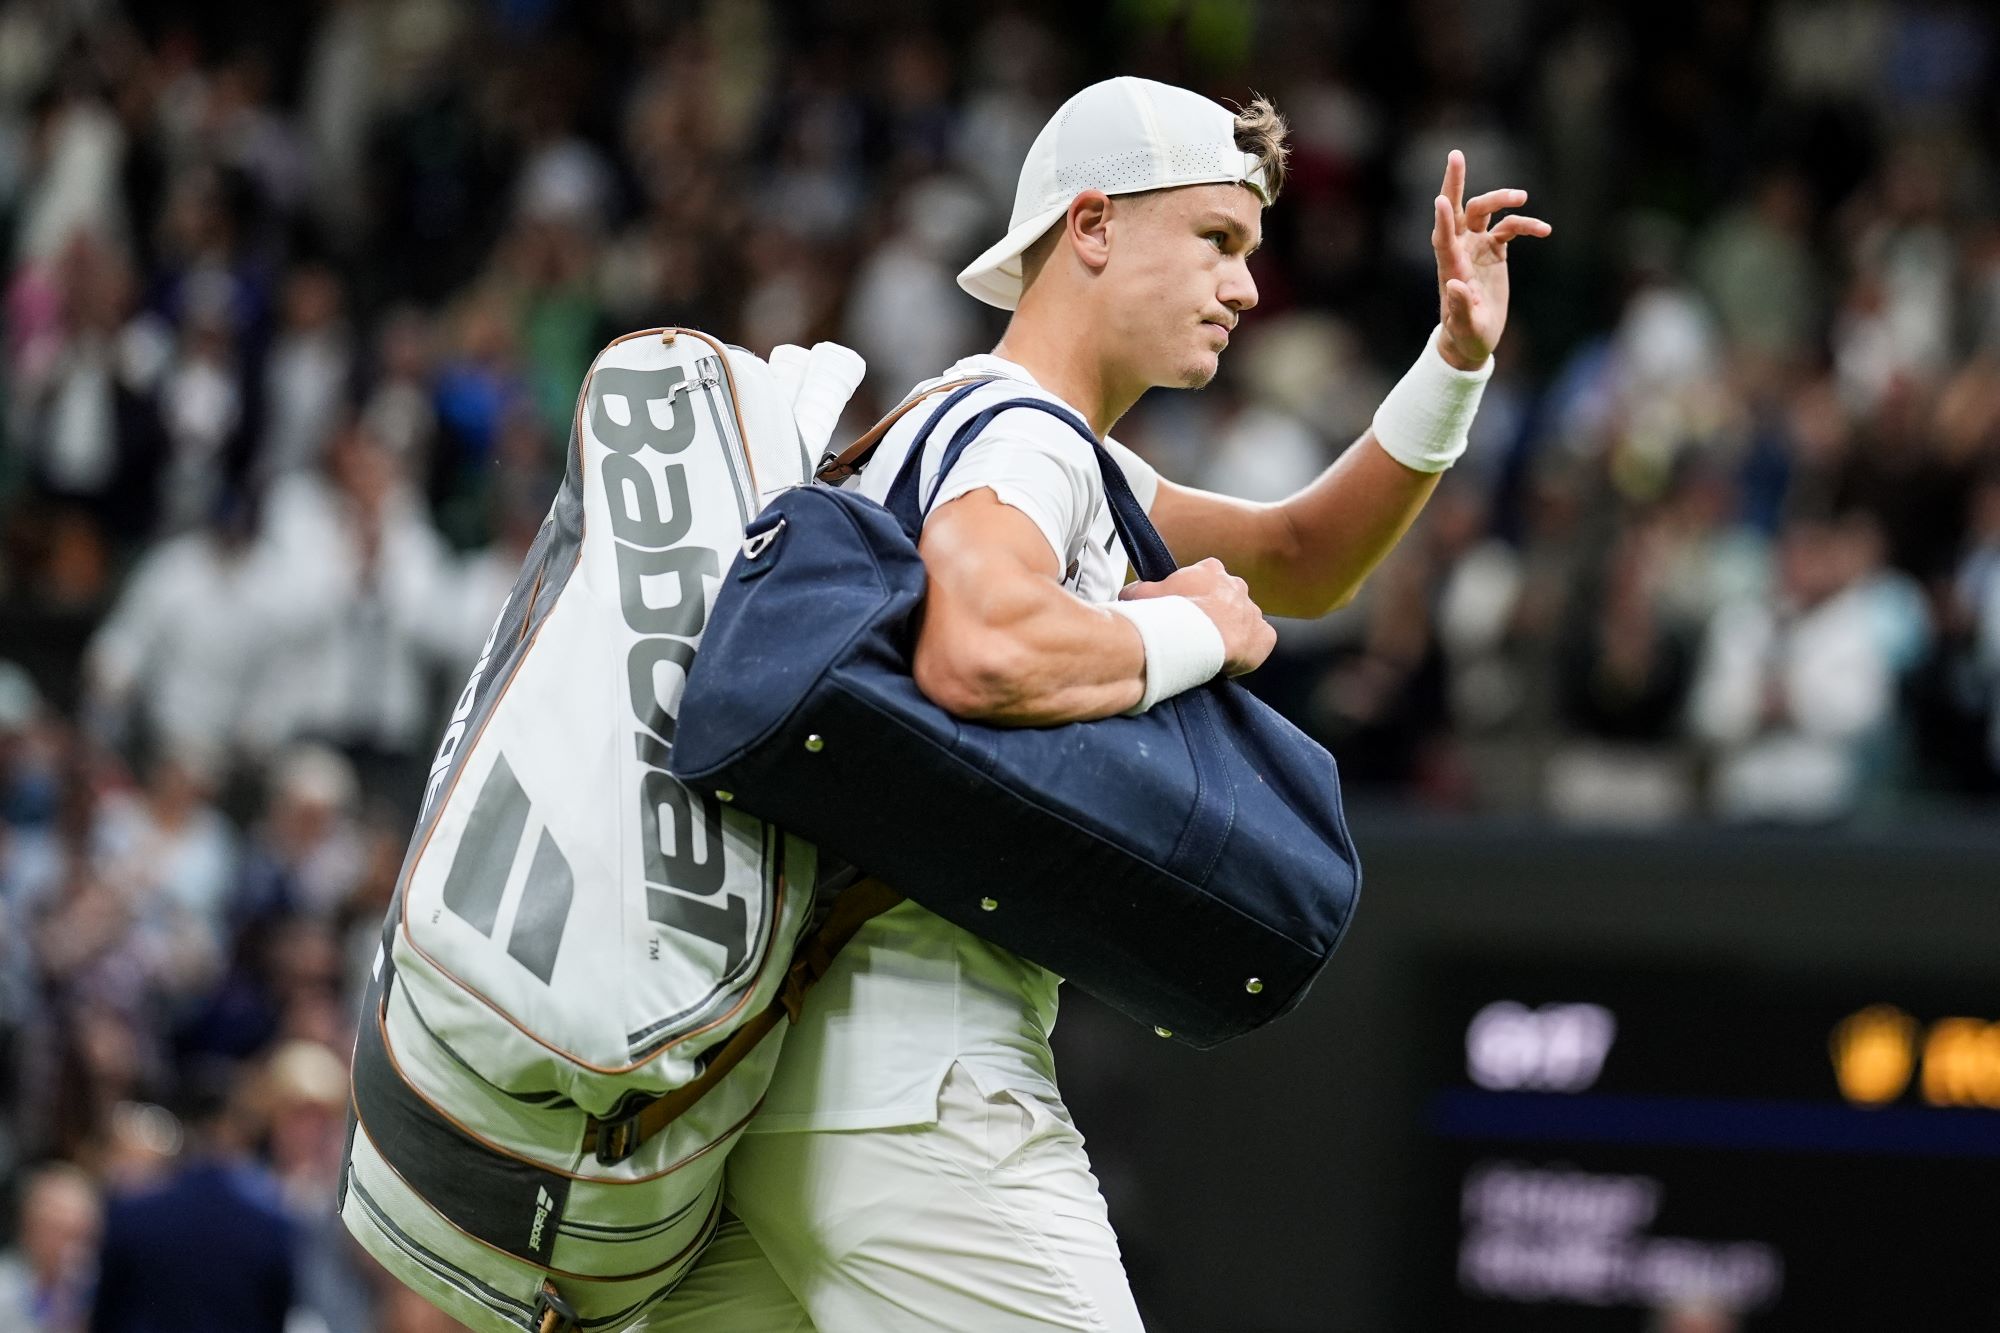 Holger Rune carrying his bags on the court